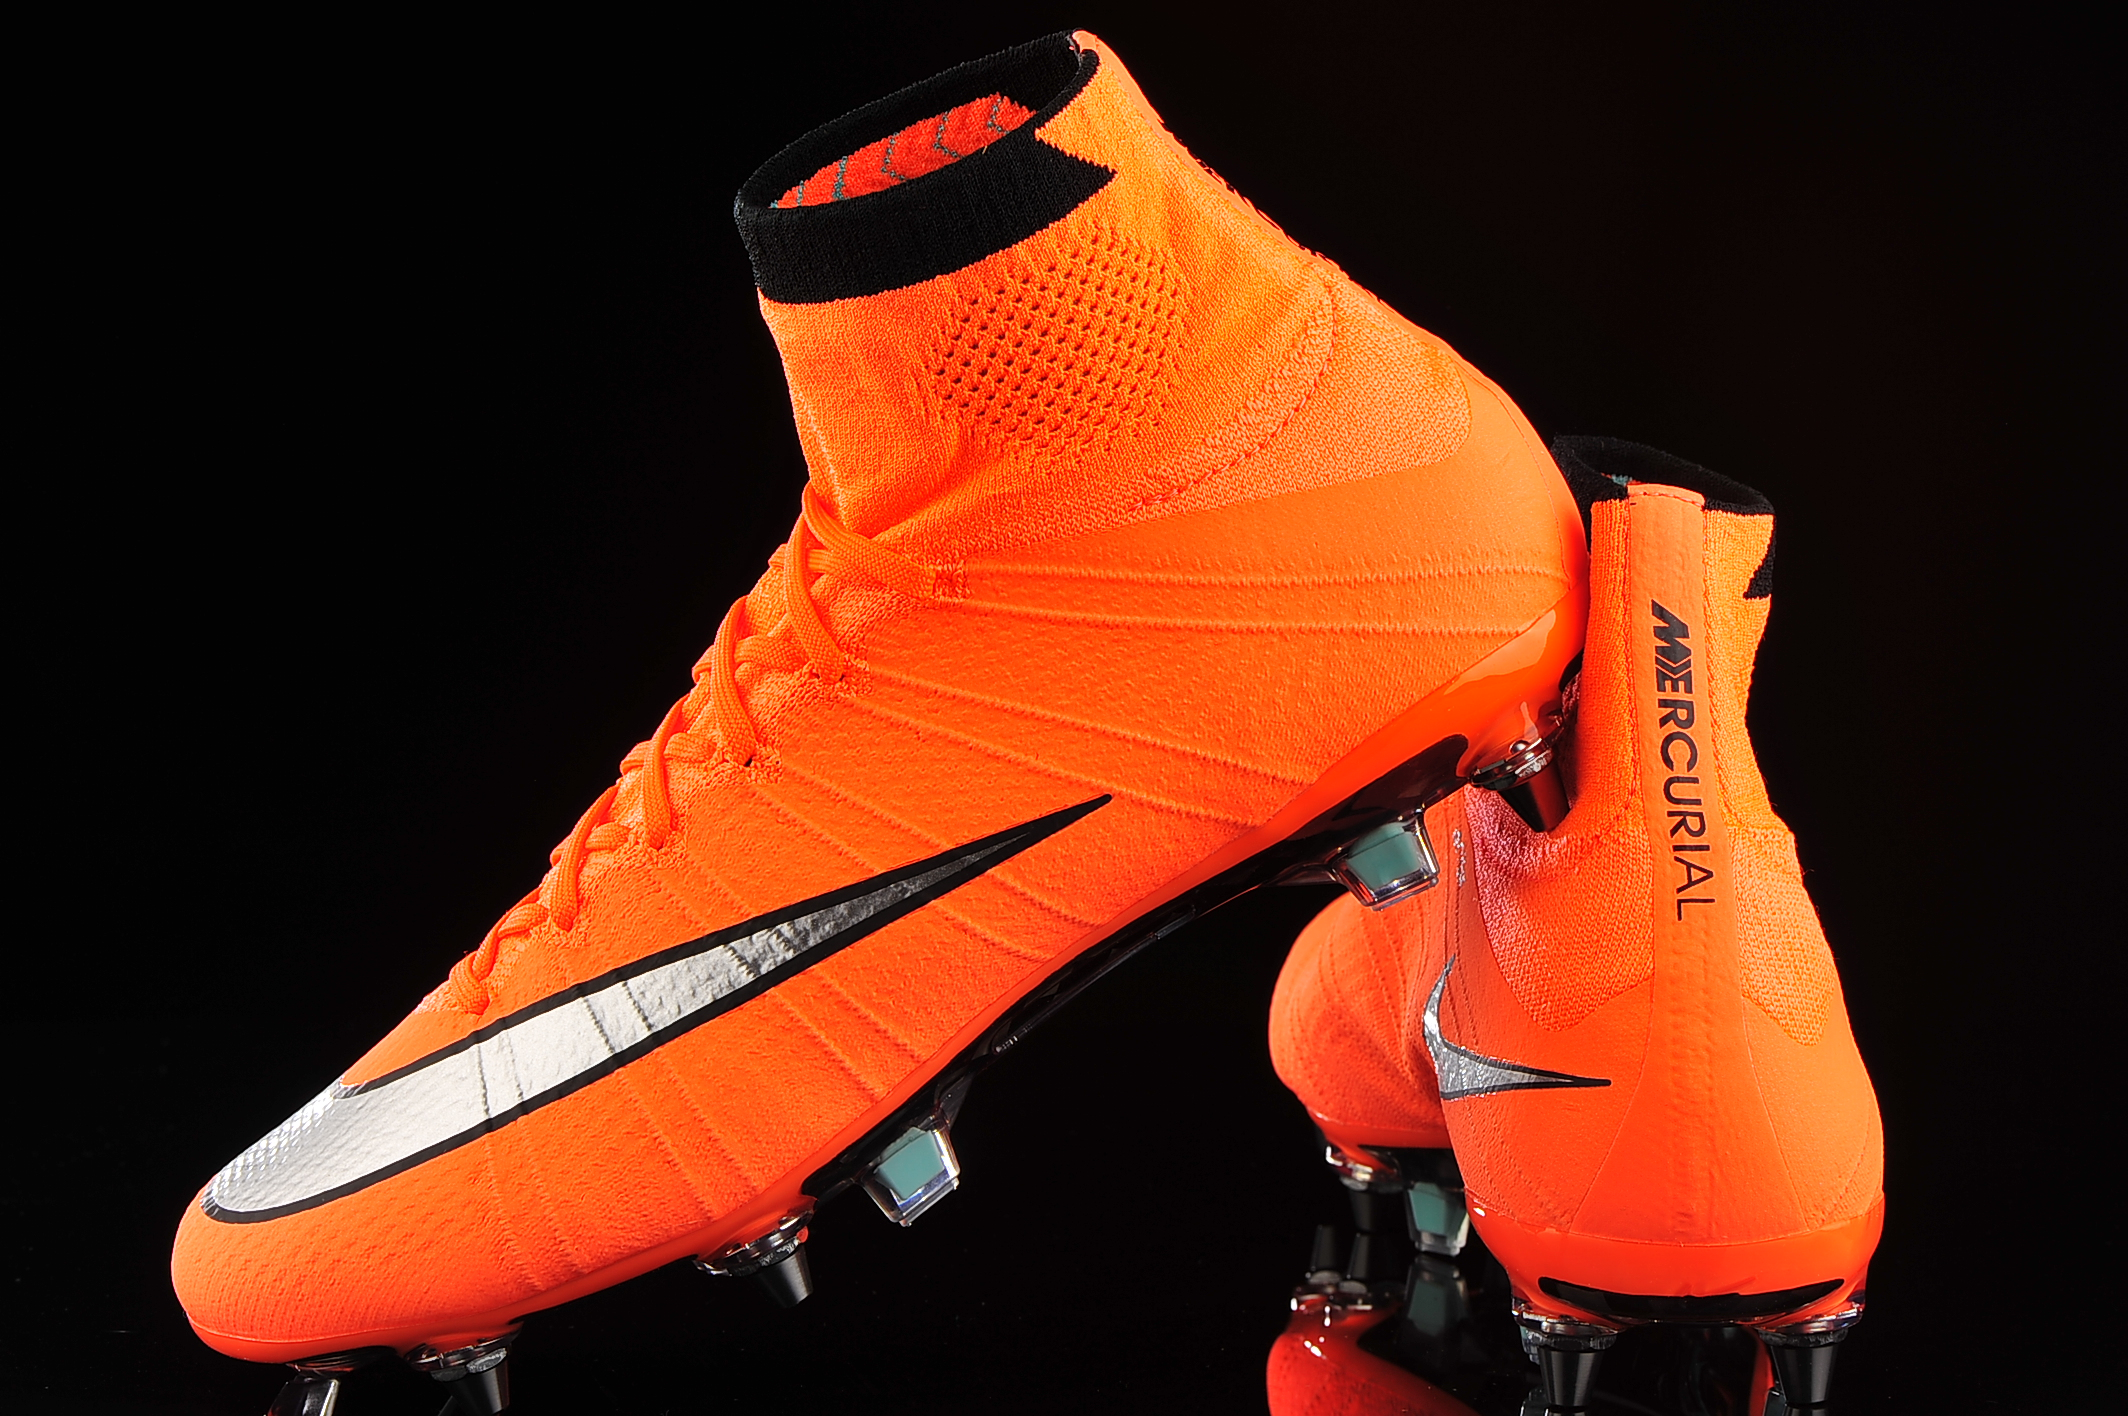 nike mercurial superfly 4 sg pro